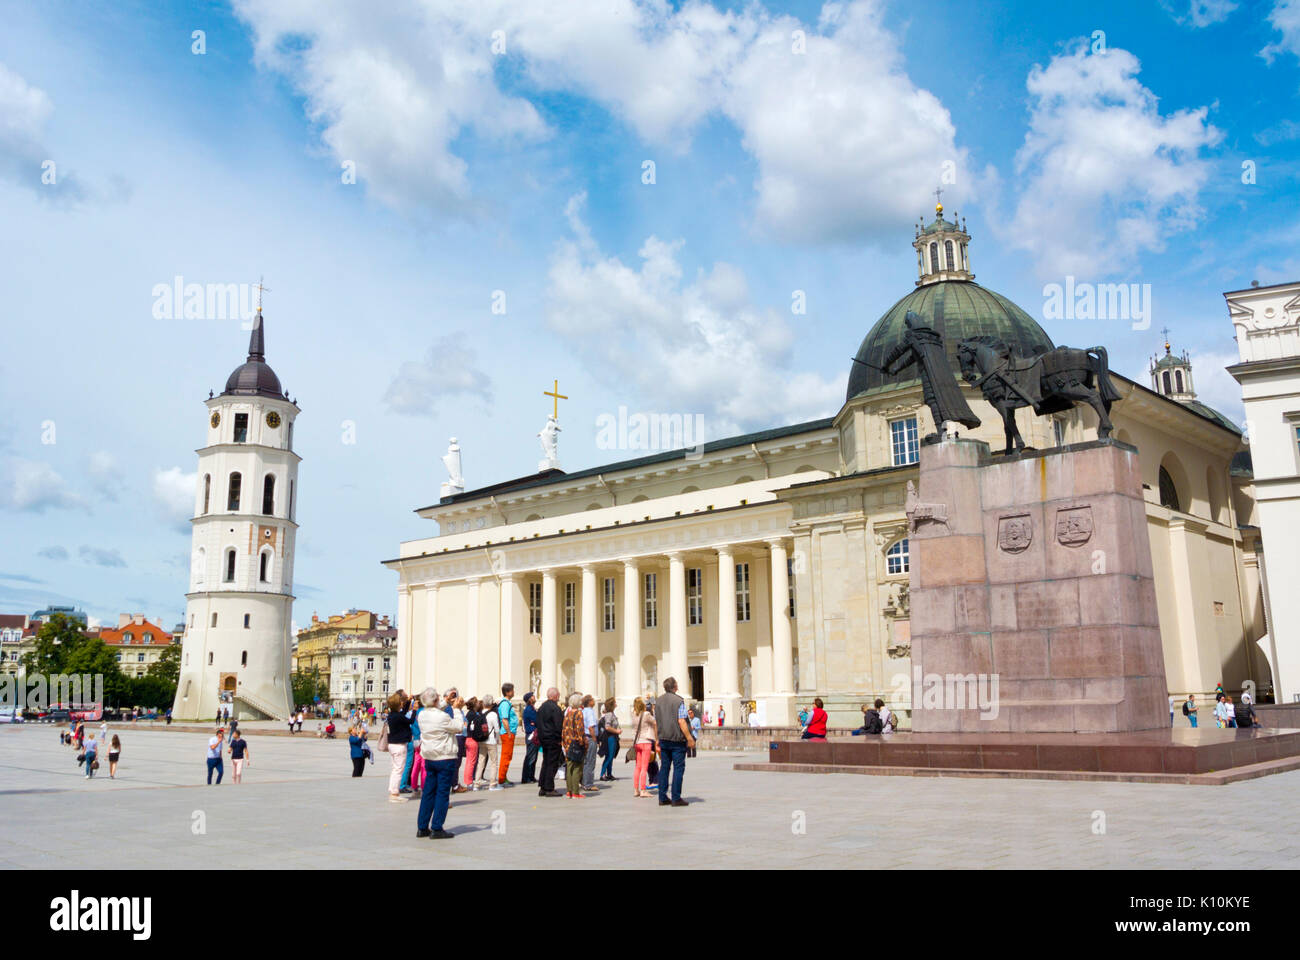 Monument to Grand Duke Gediminas and the cathedral, Katedros aikste, Cathedral Square, Vilnius, Lithuania Stock Photo